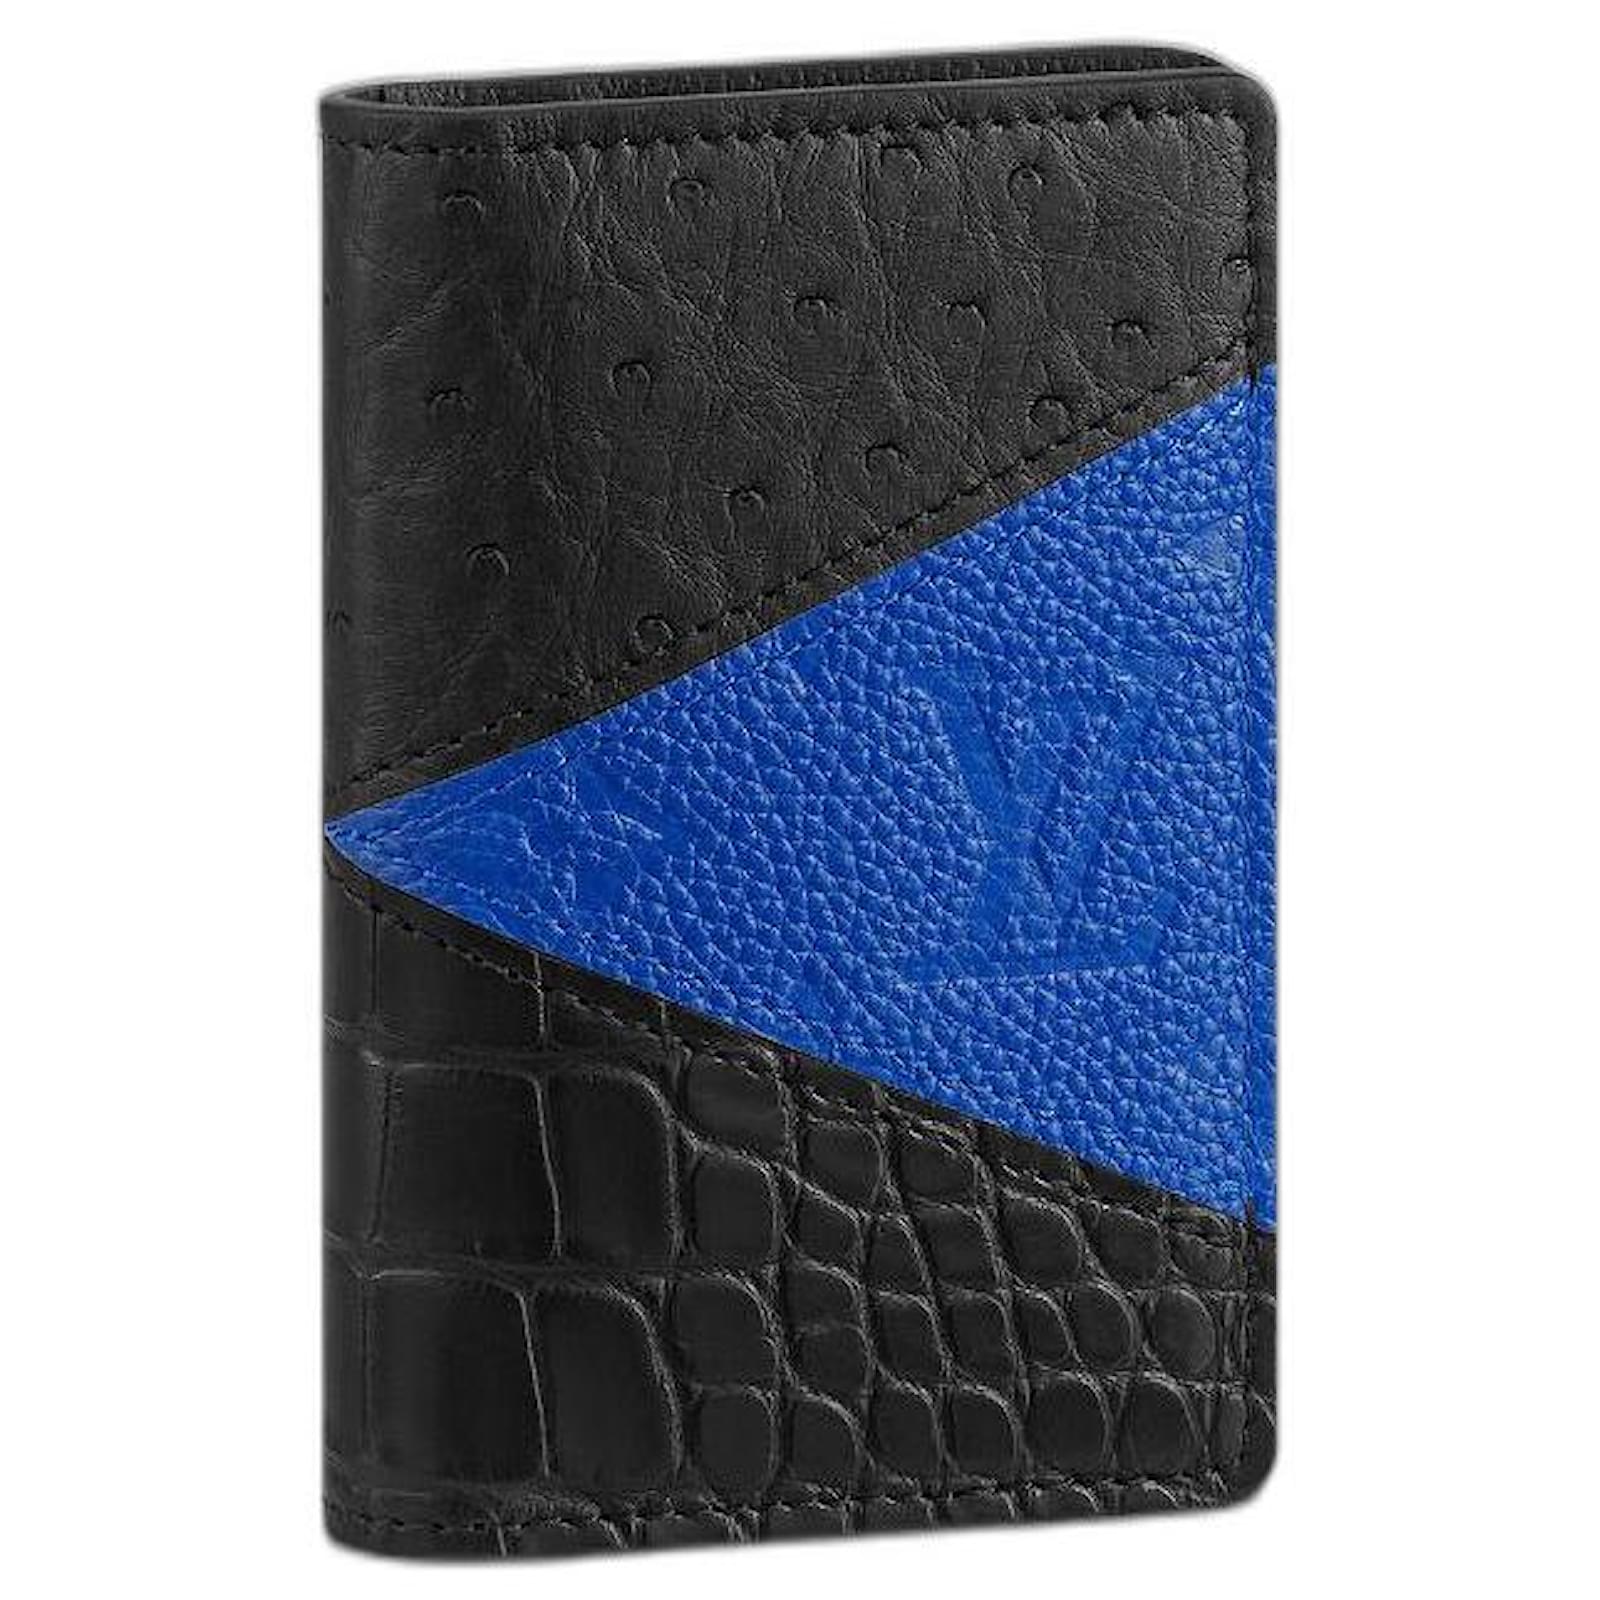 Pocket Organiser - Luxury Exotic Leather Wallets - Wallets and